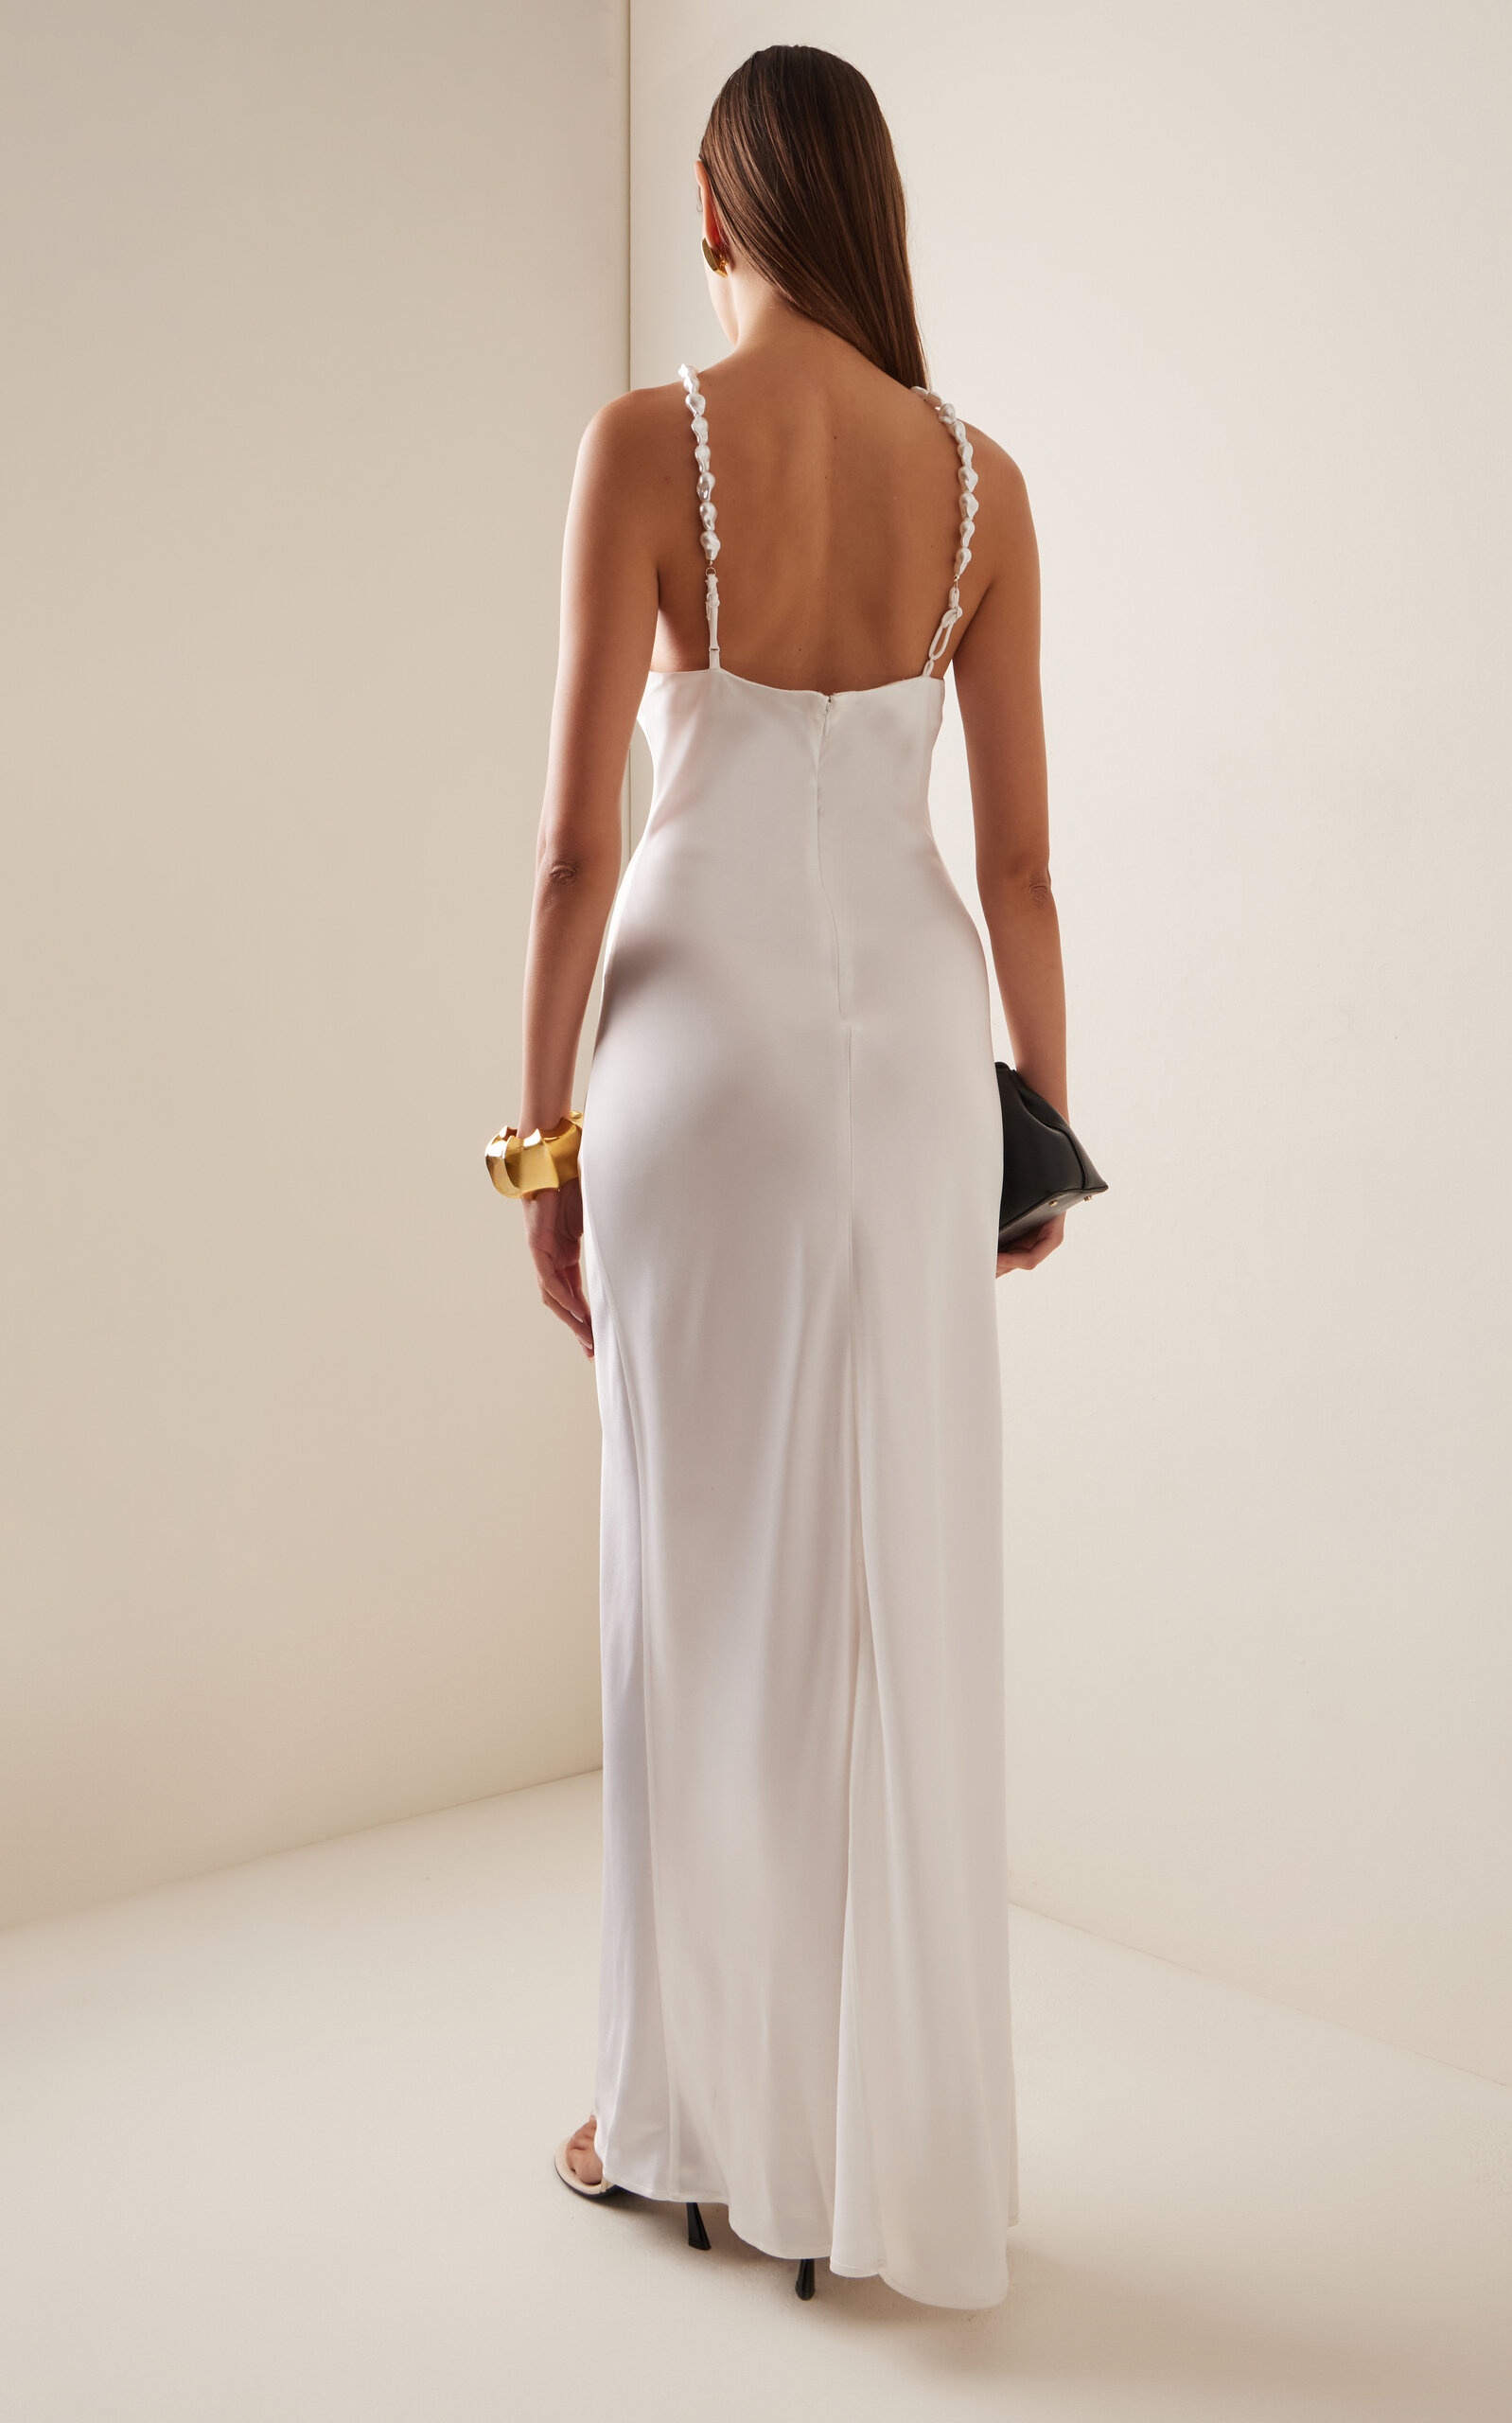 Exclusive Cadence Pearl-Embellished Satin Maxi Slip Dress white - 4